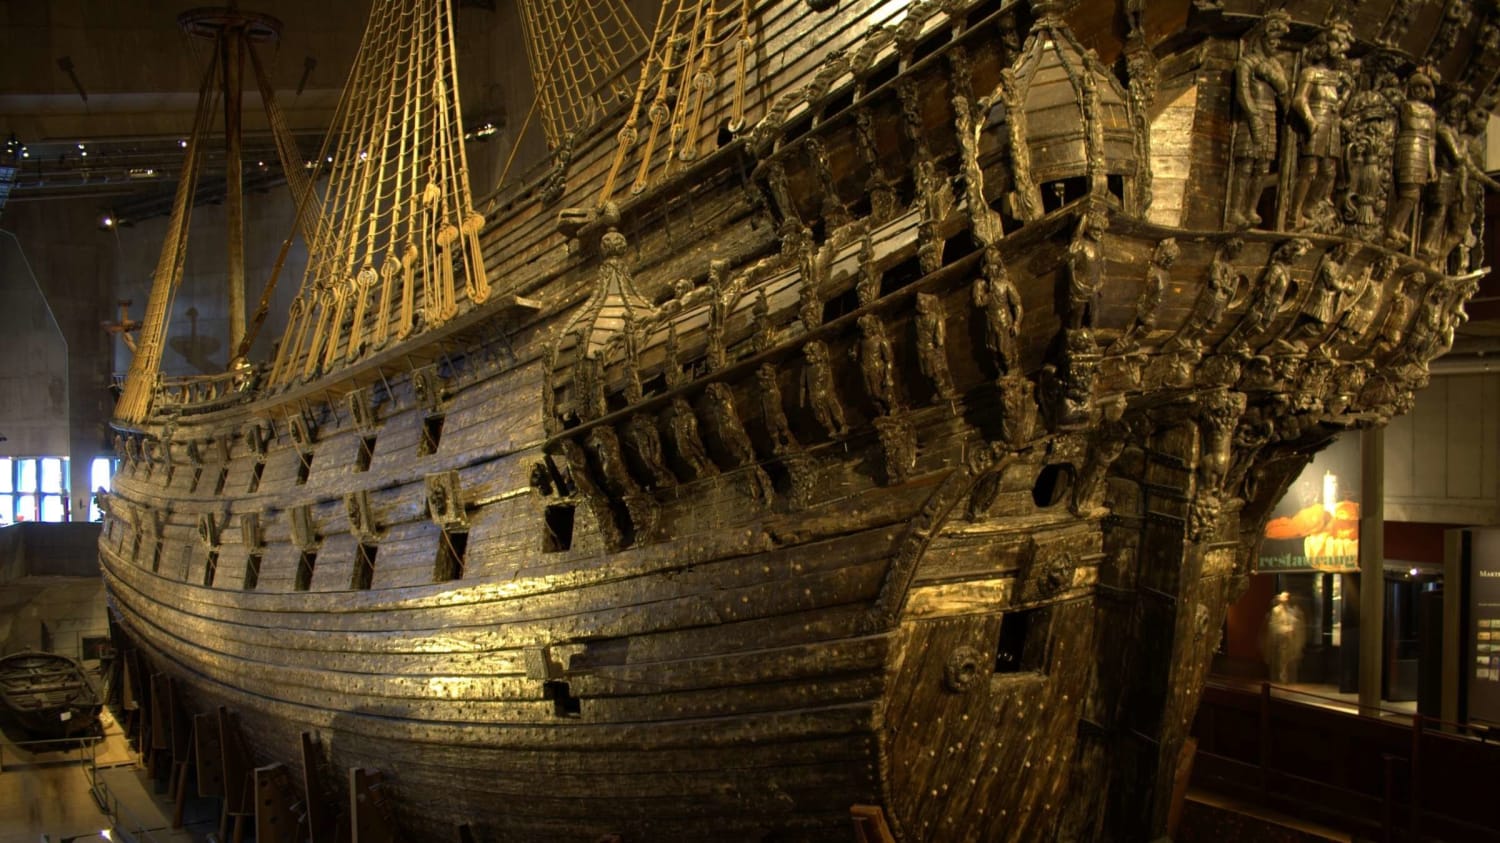 Swedish Divers Just Discovered Two Shipwrecks That Might Be Related to the Famous Vasa Warship